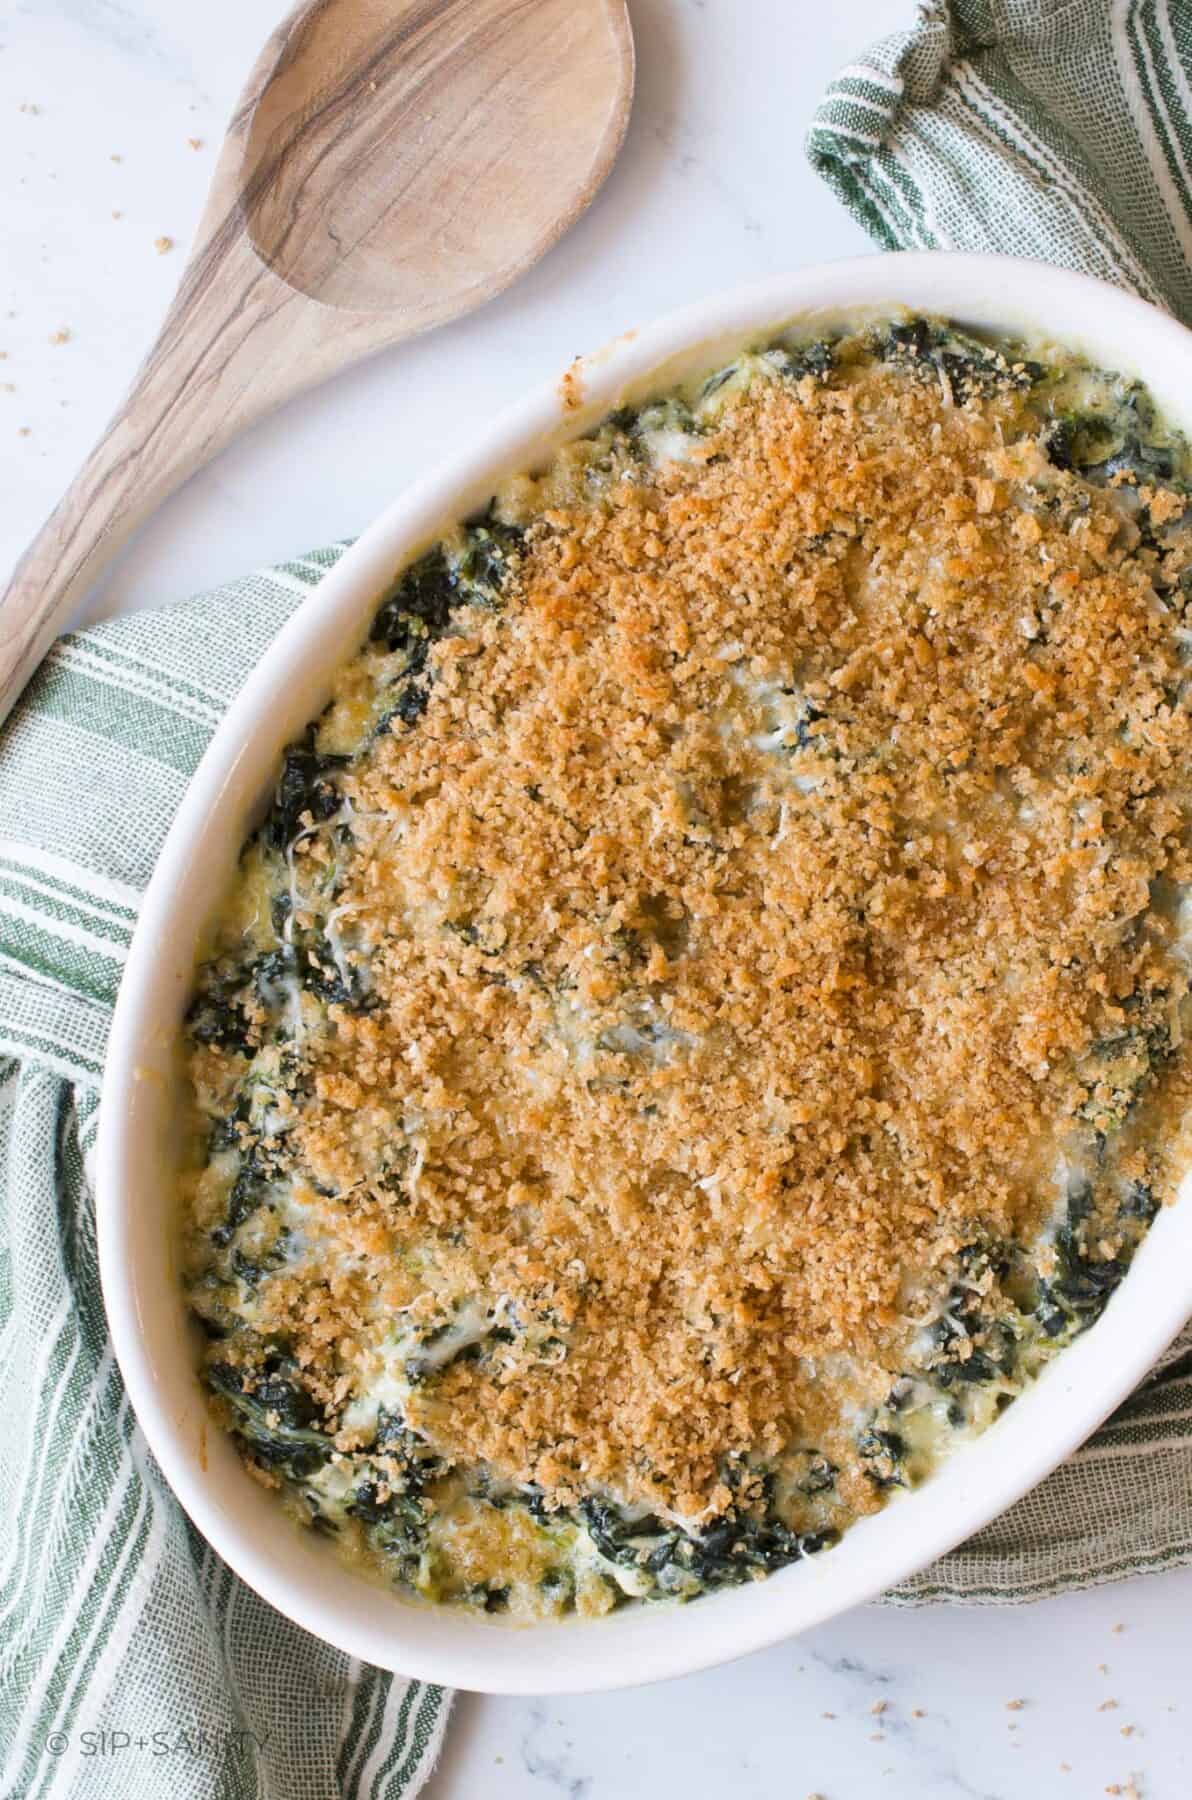 Overhead shot of asiago creamed spinach casserole on a a green striped towel next to a wooden spoon.